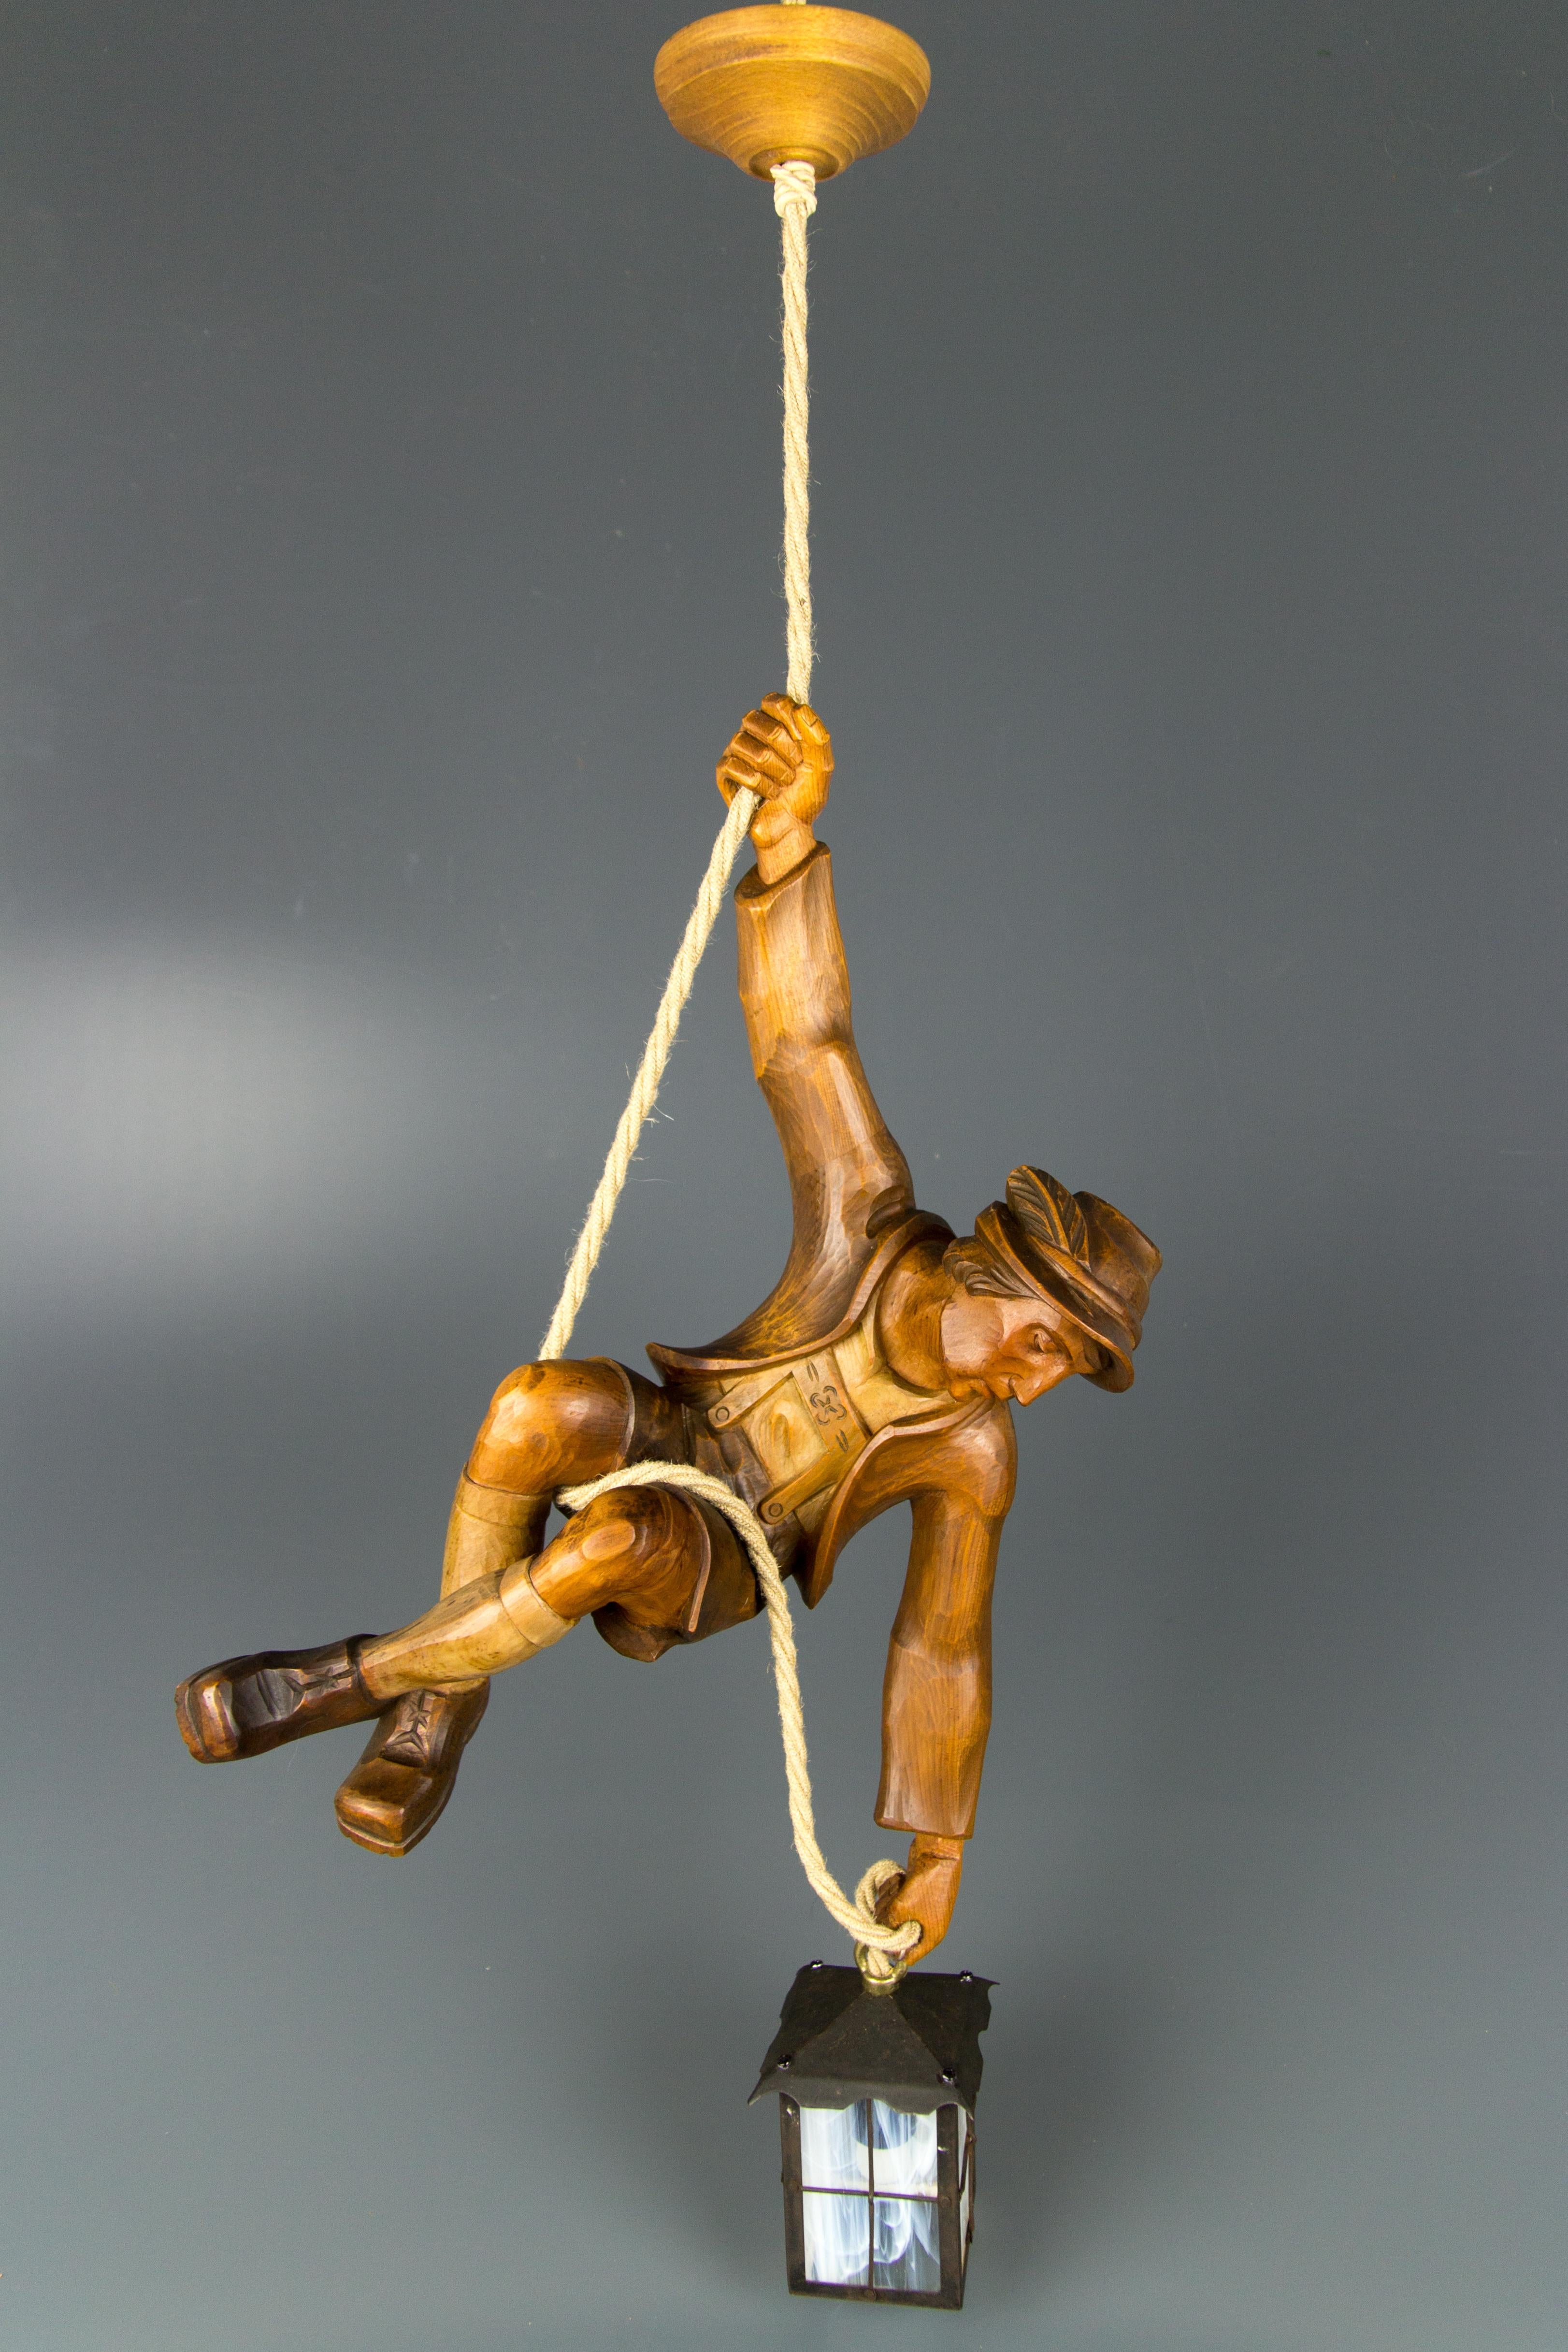 Figural Pendant Light of a Hand Carved Wood Figure Mountain Climber with Lantern 1